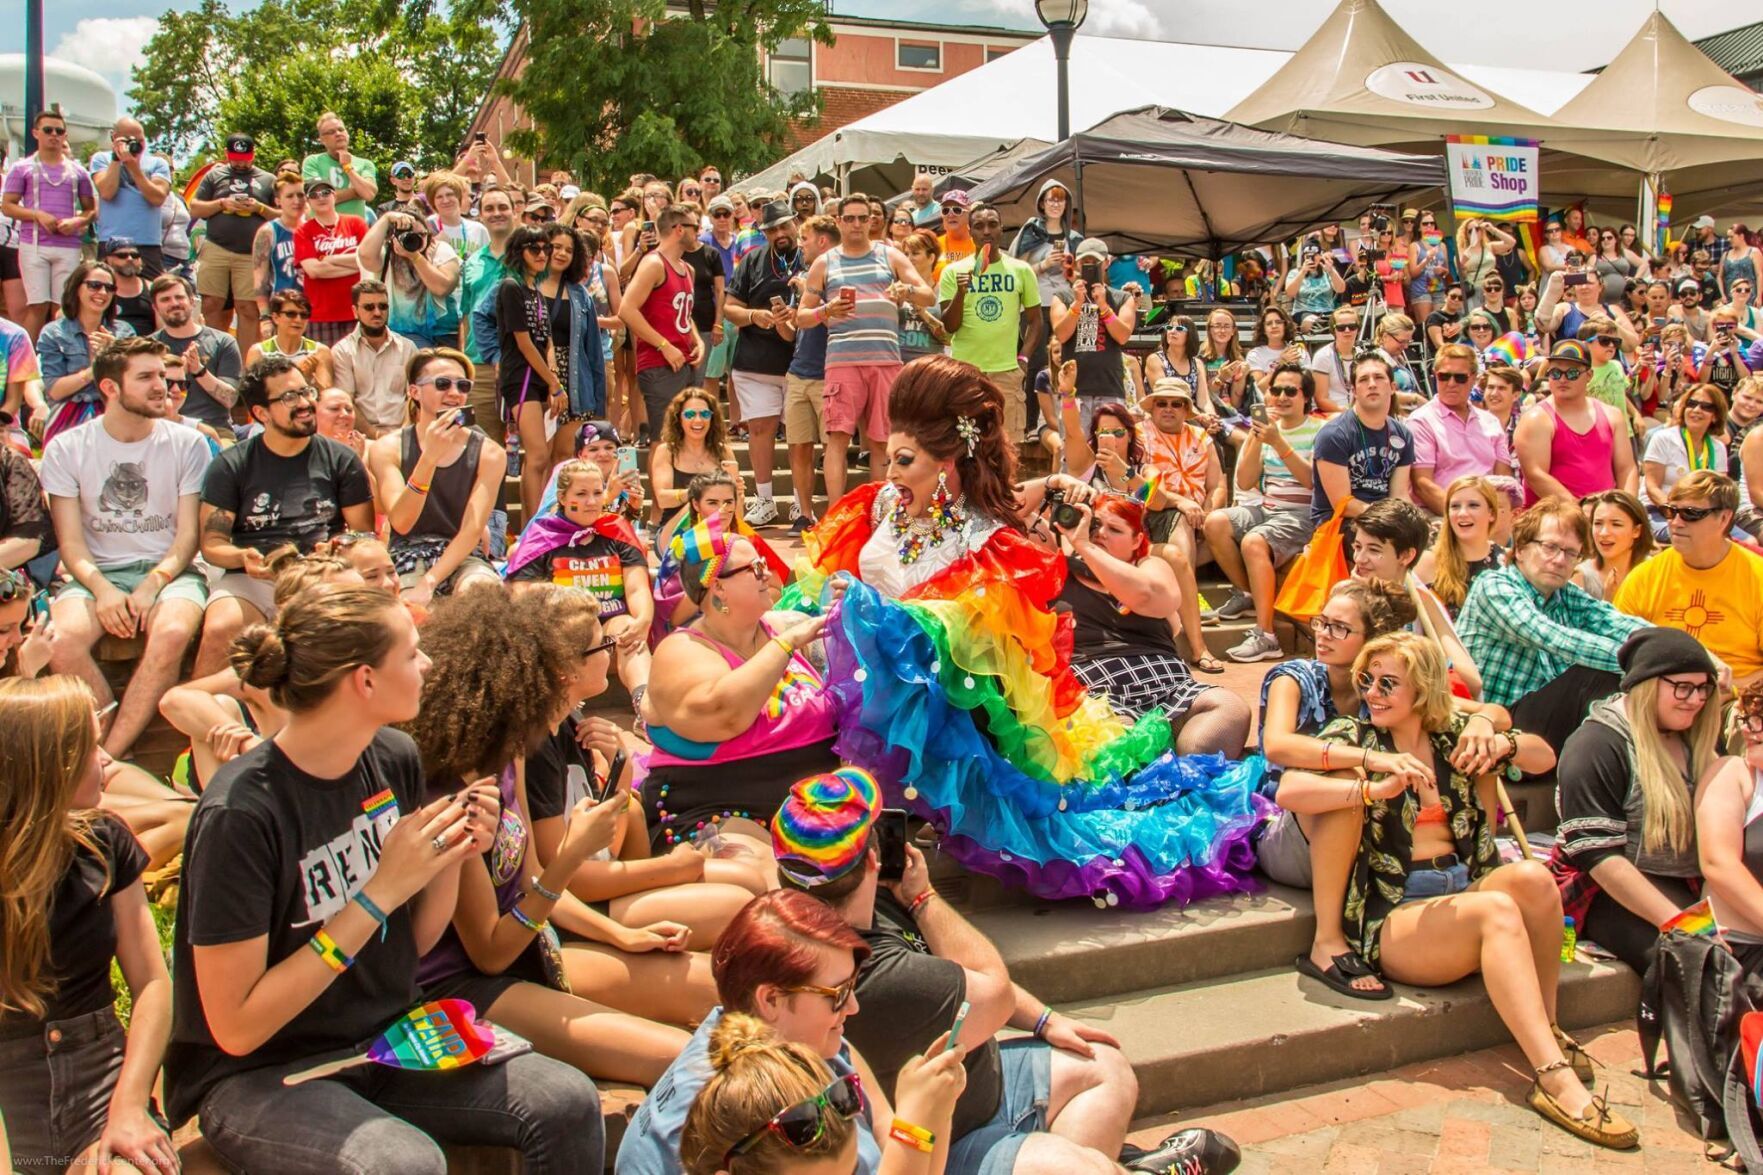 Frederick Pride celebrates, connects LGBTQ community Arts and entertainment fredericknewspost photo picture